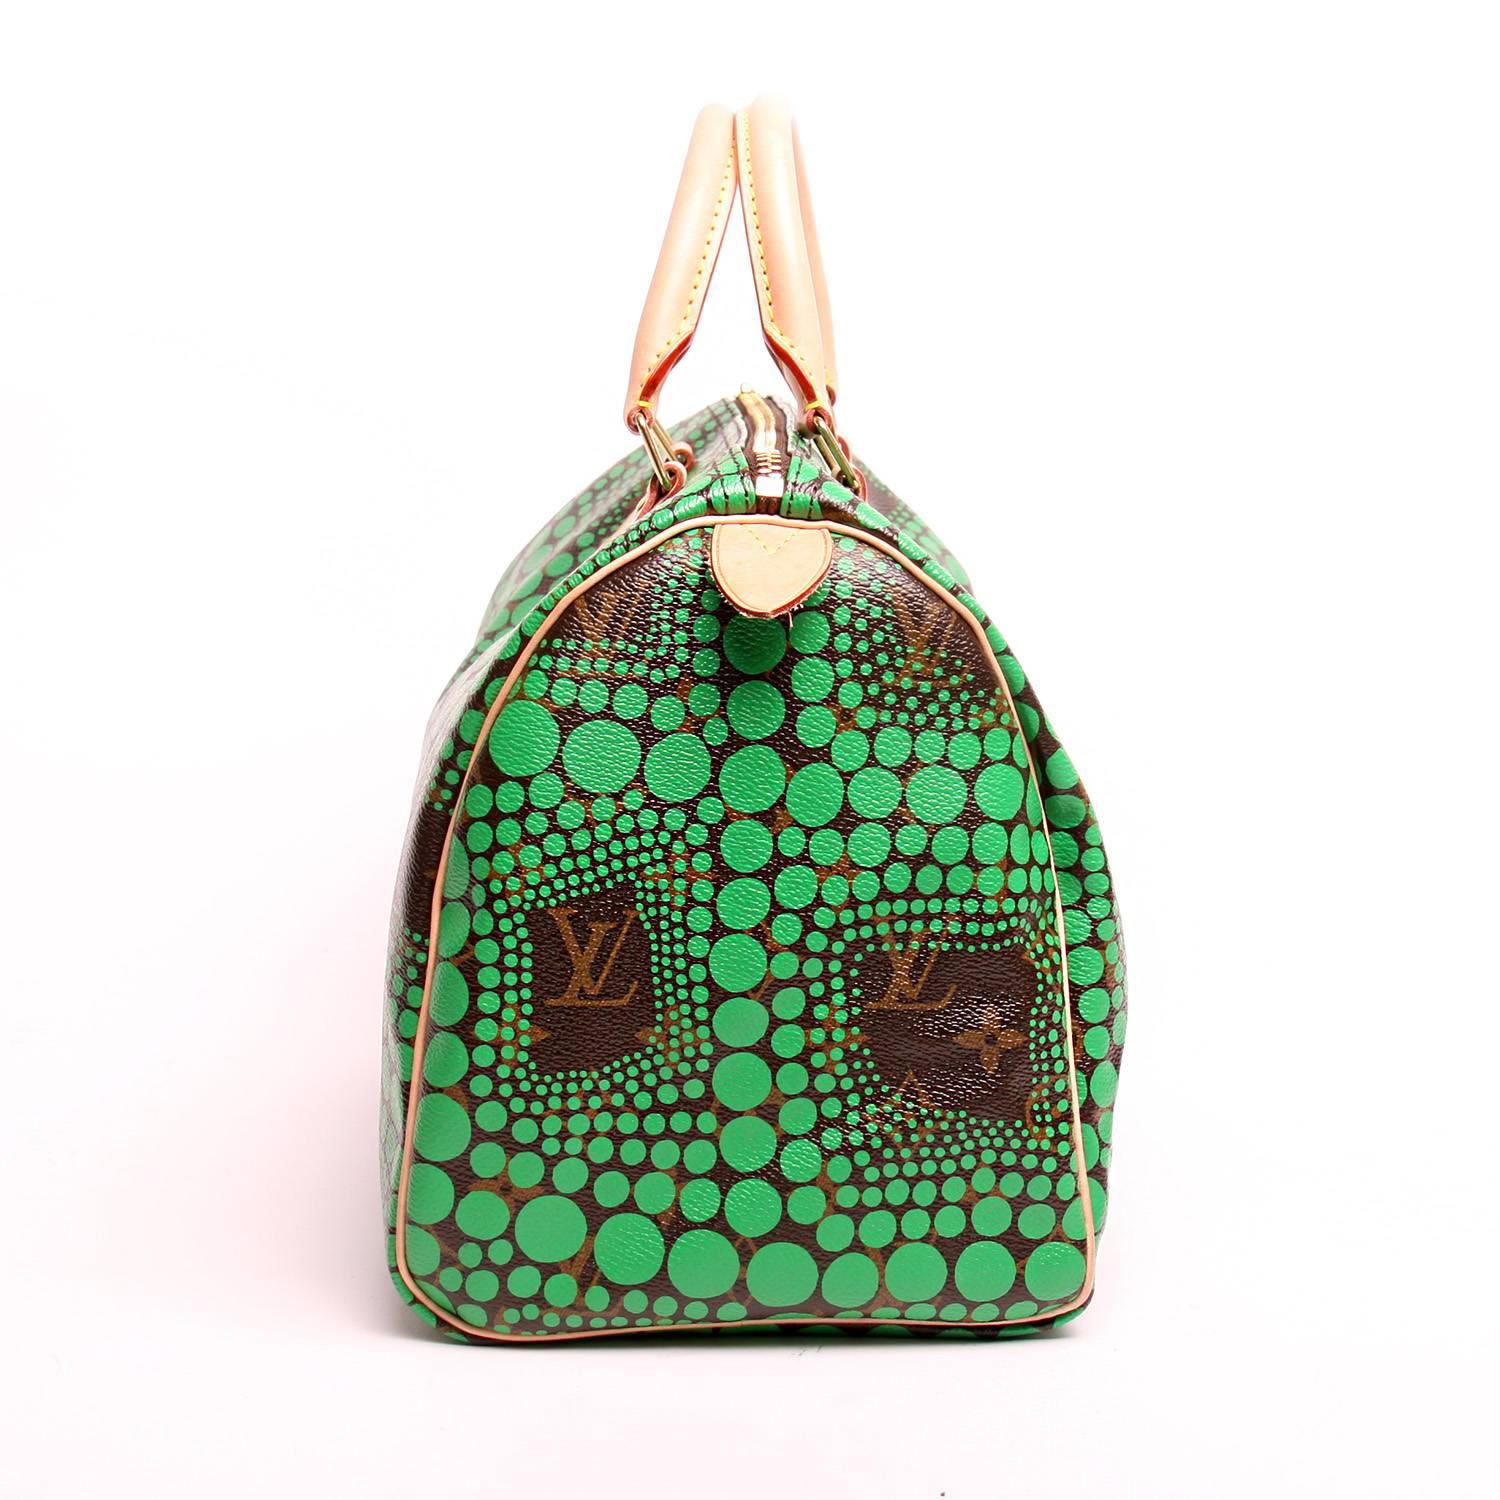 From Louis Vuitton’s Yayoi Kusama collection. This stunning Speedy tote features a graphic polka dot pattern from artist Yayoi Kusama printed in green on traditional brown Louis Vuitton monogram toile canvas. The bag features vachetta cowhide rolled